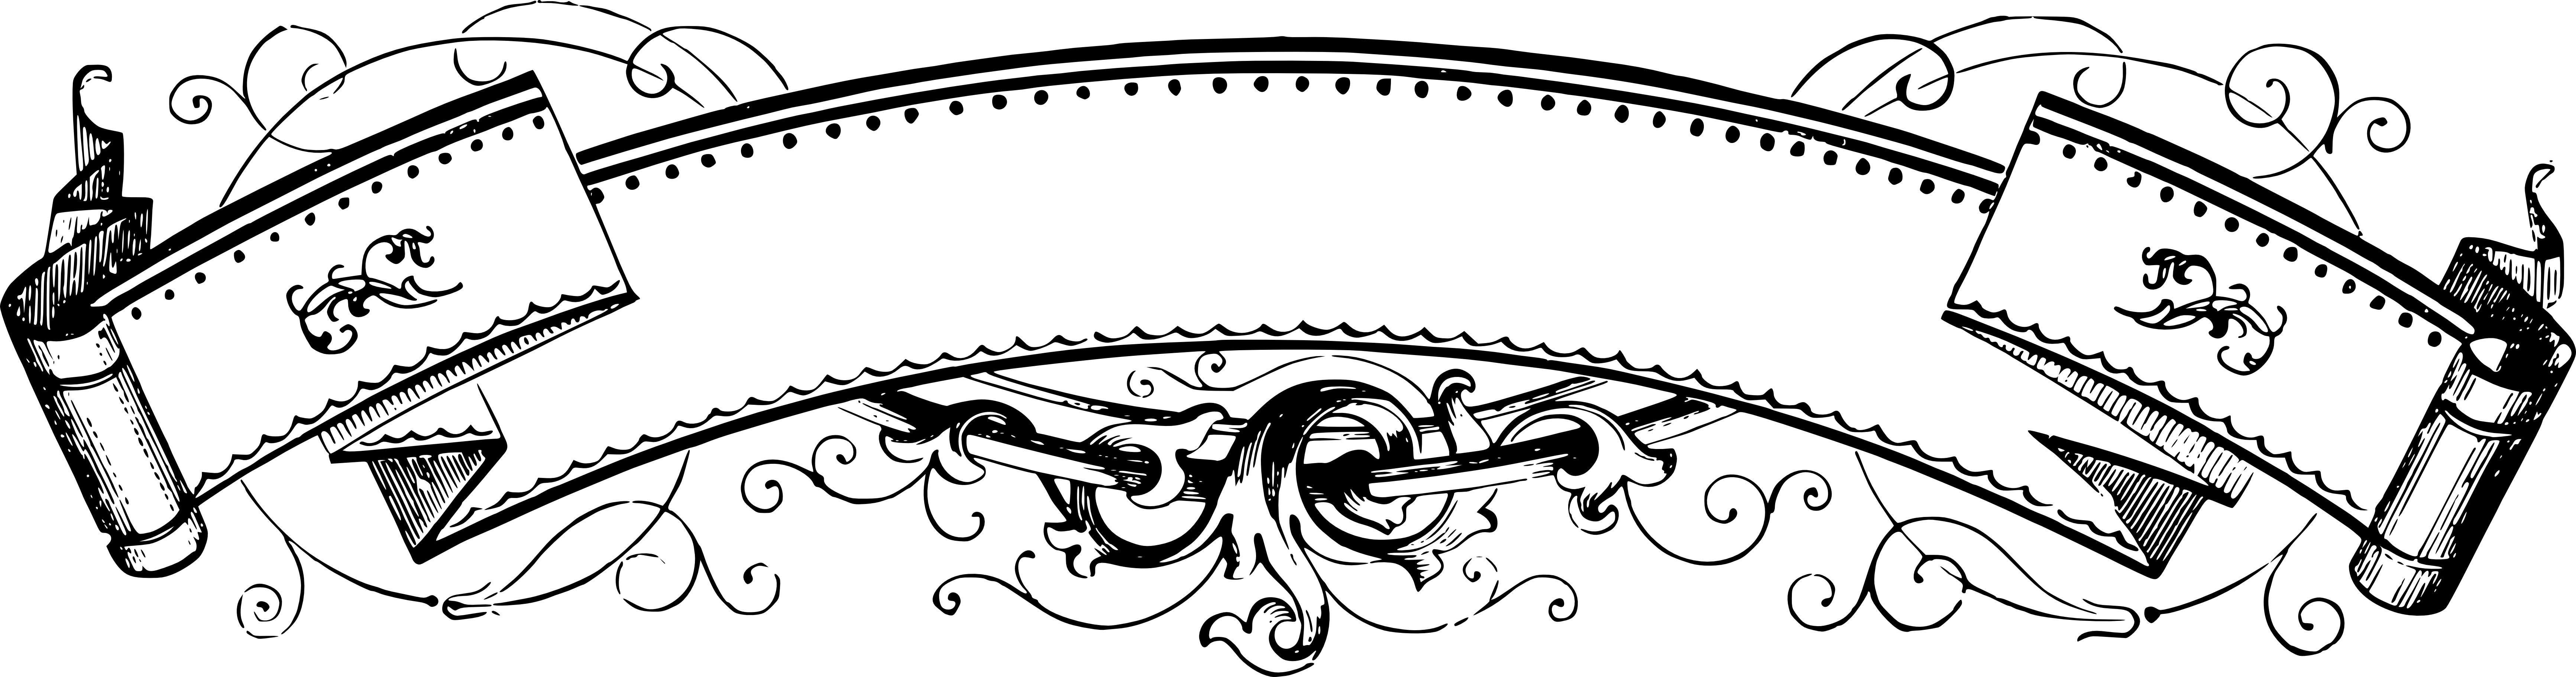 Banners clipart victorian.